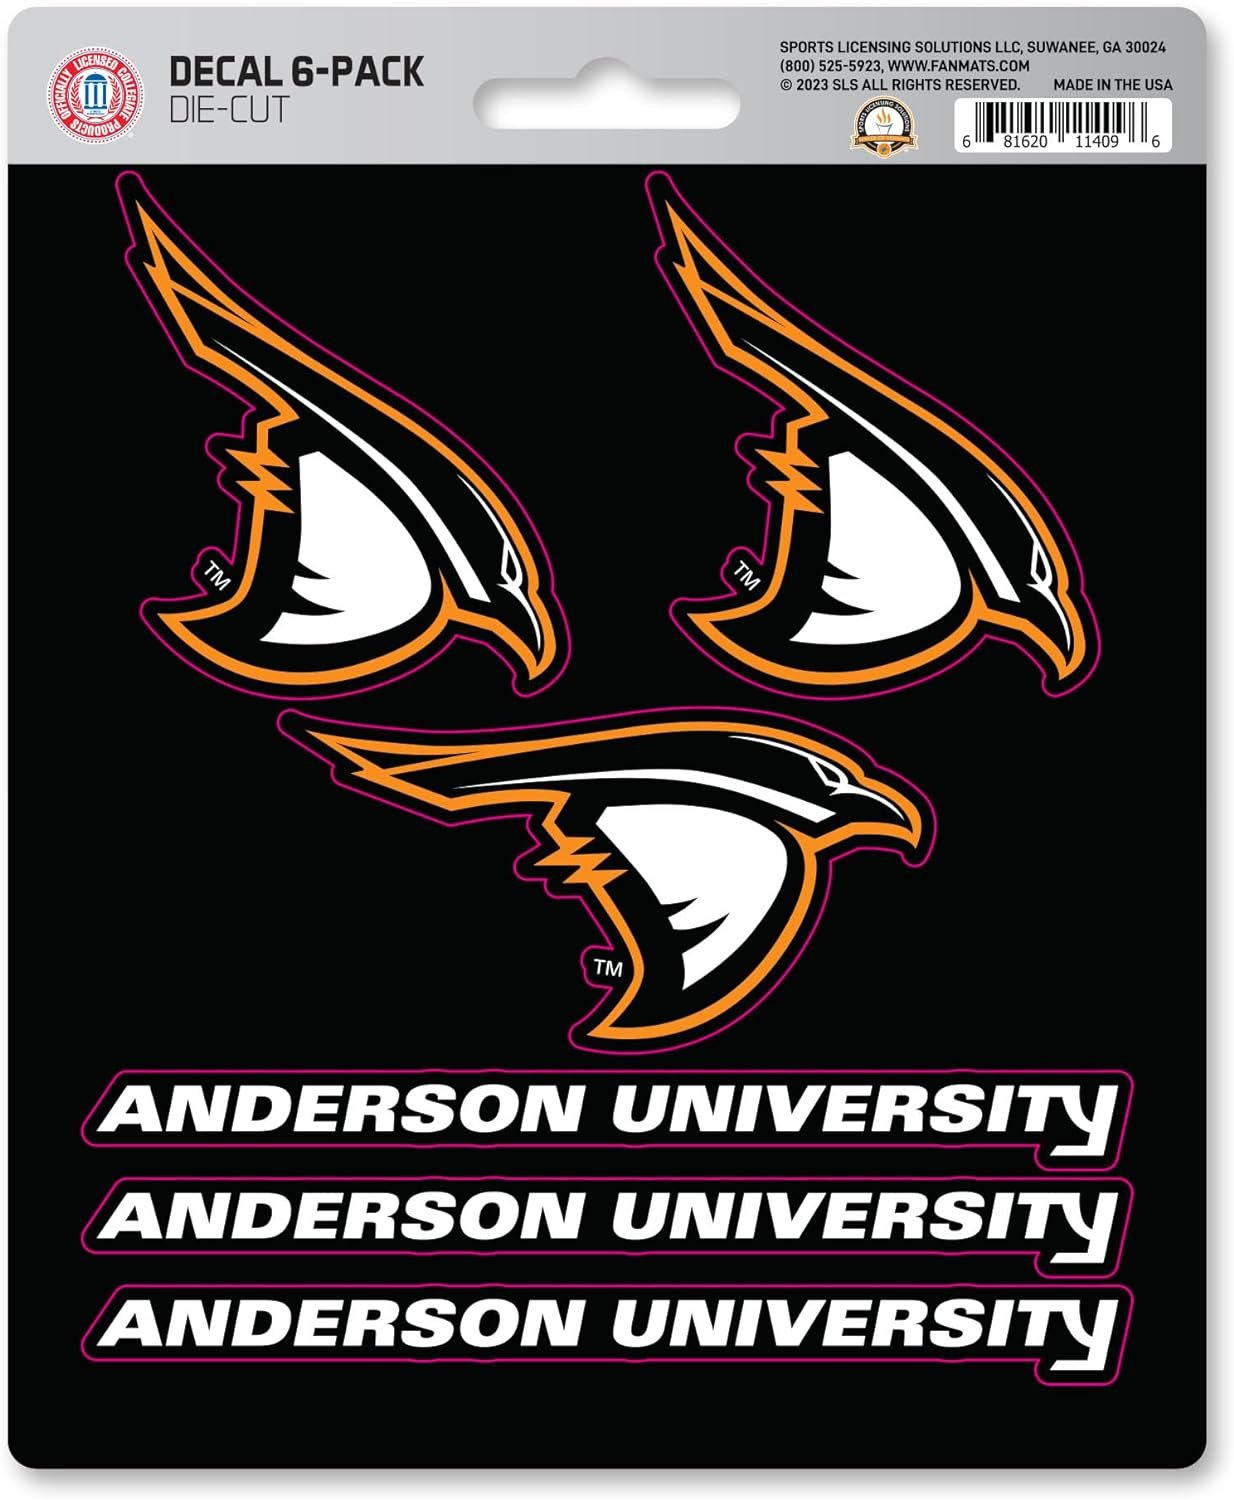 Anderson University Ravens 6-Piece Decal Sticker Set, 5x6 Inch Sheet, Gift for football fans for any hard surfaces around home, automotive, personal items